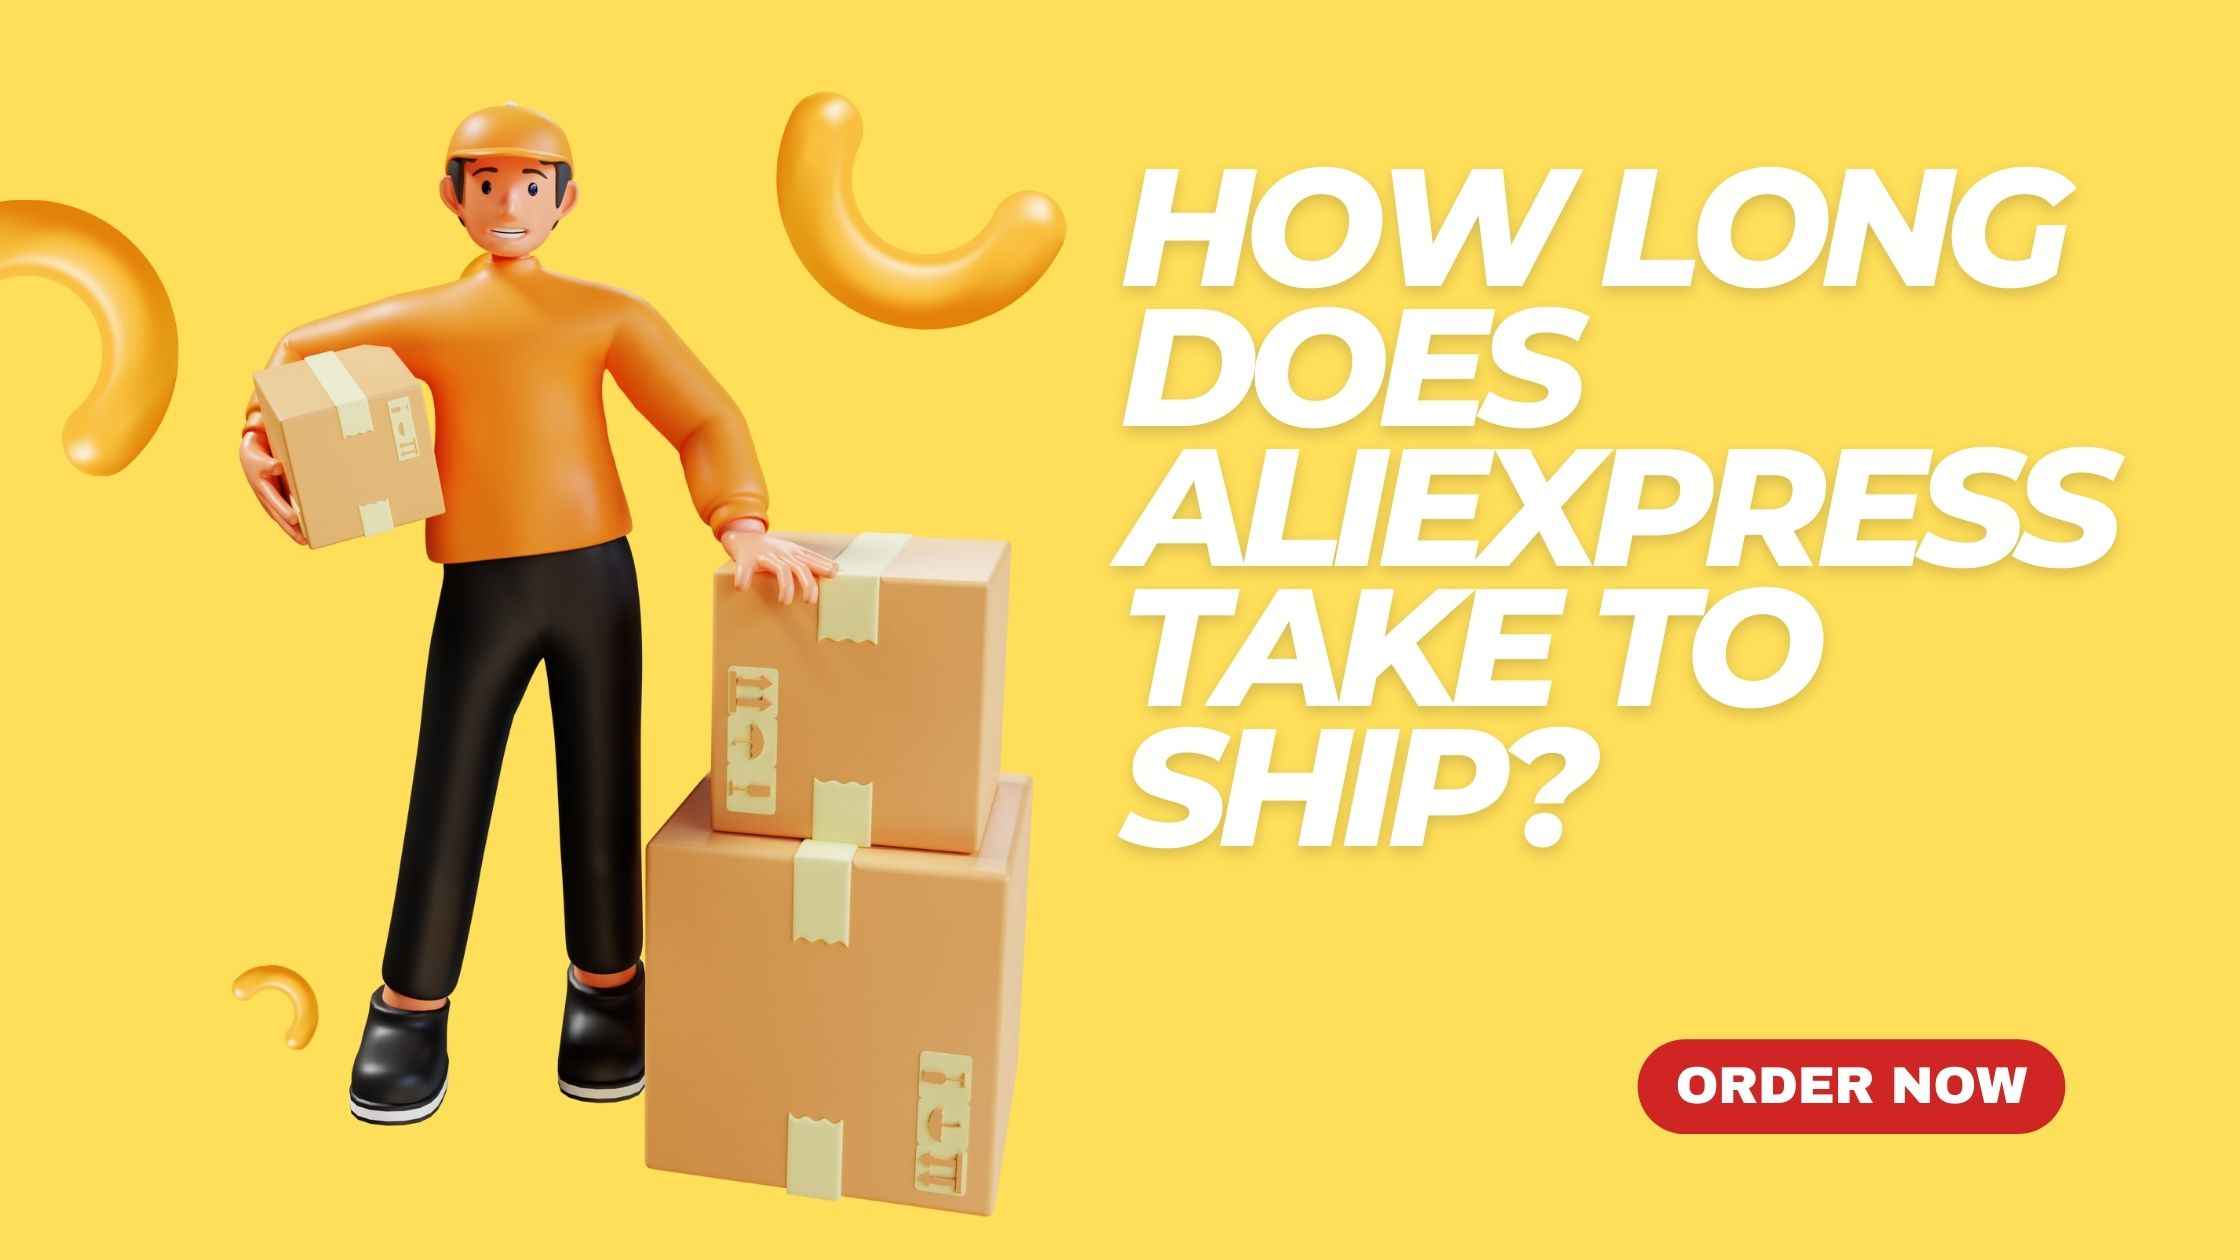 yellow background with a delivery man and written "How Long Does AliExpress Take to Ship?"